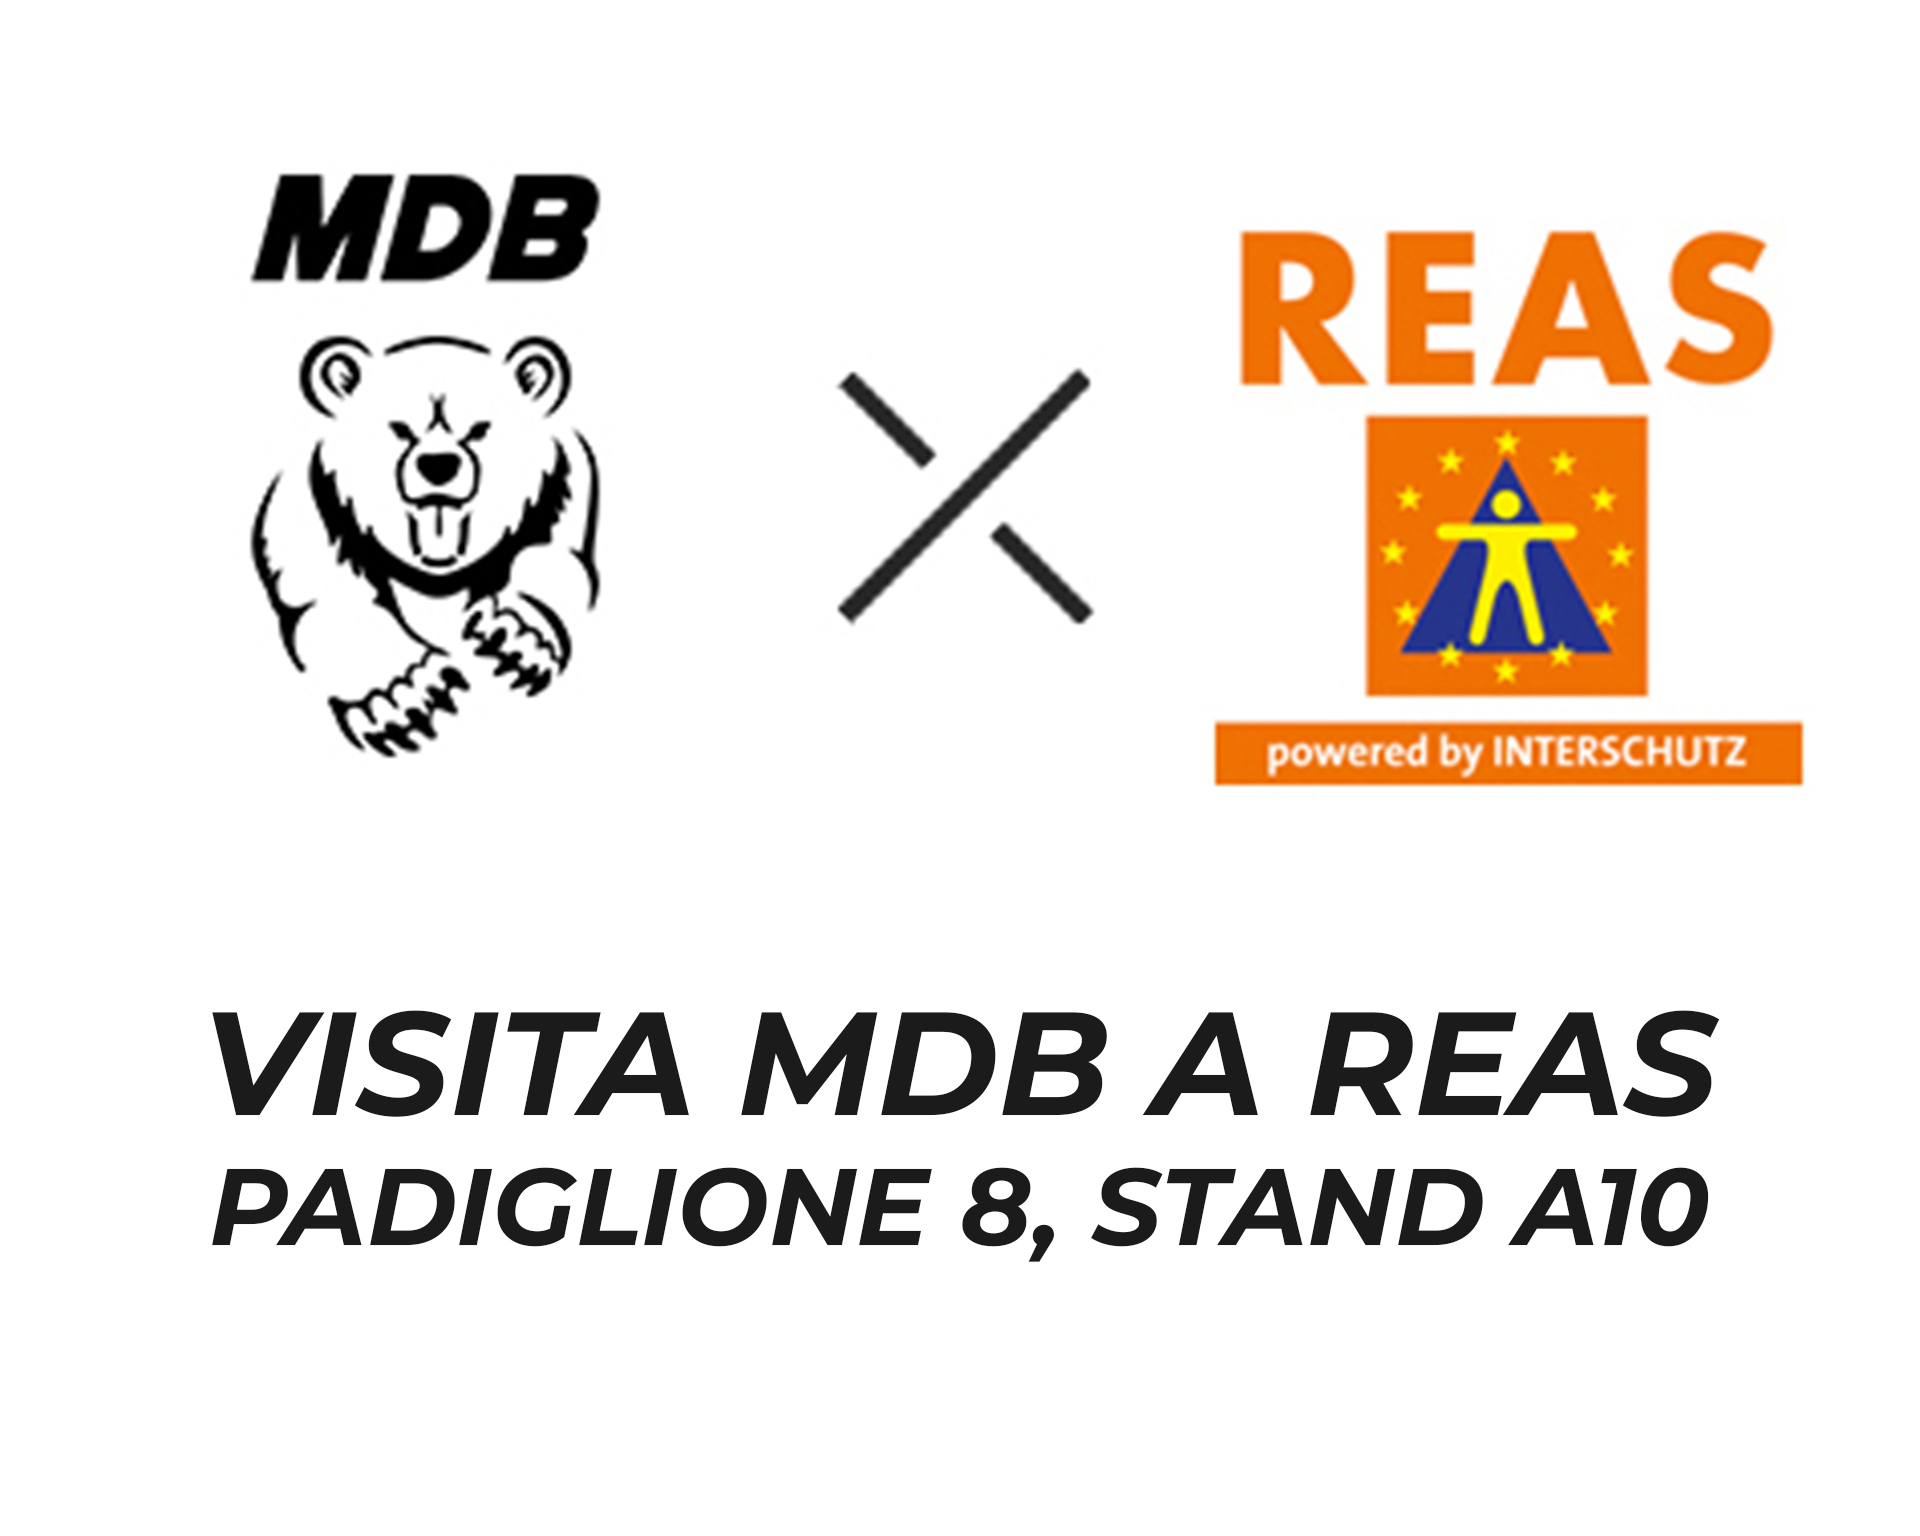 Press Release: MDB at REAS Tradeshow: Rescue, Fire Fighting, Disaster Relief and Security